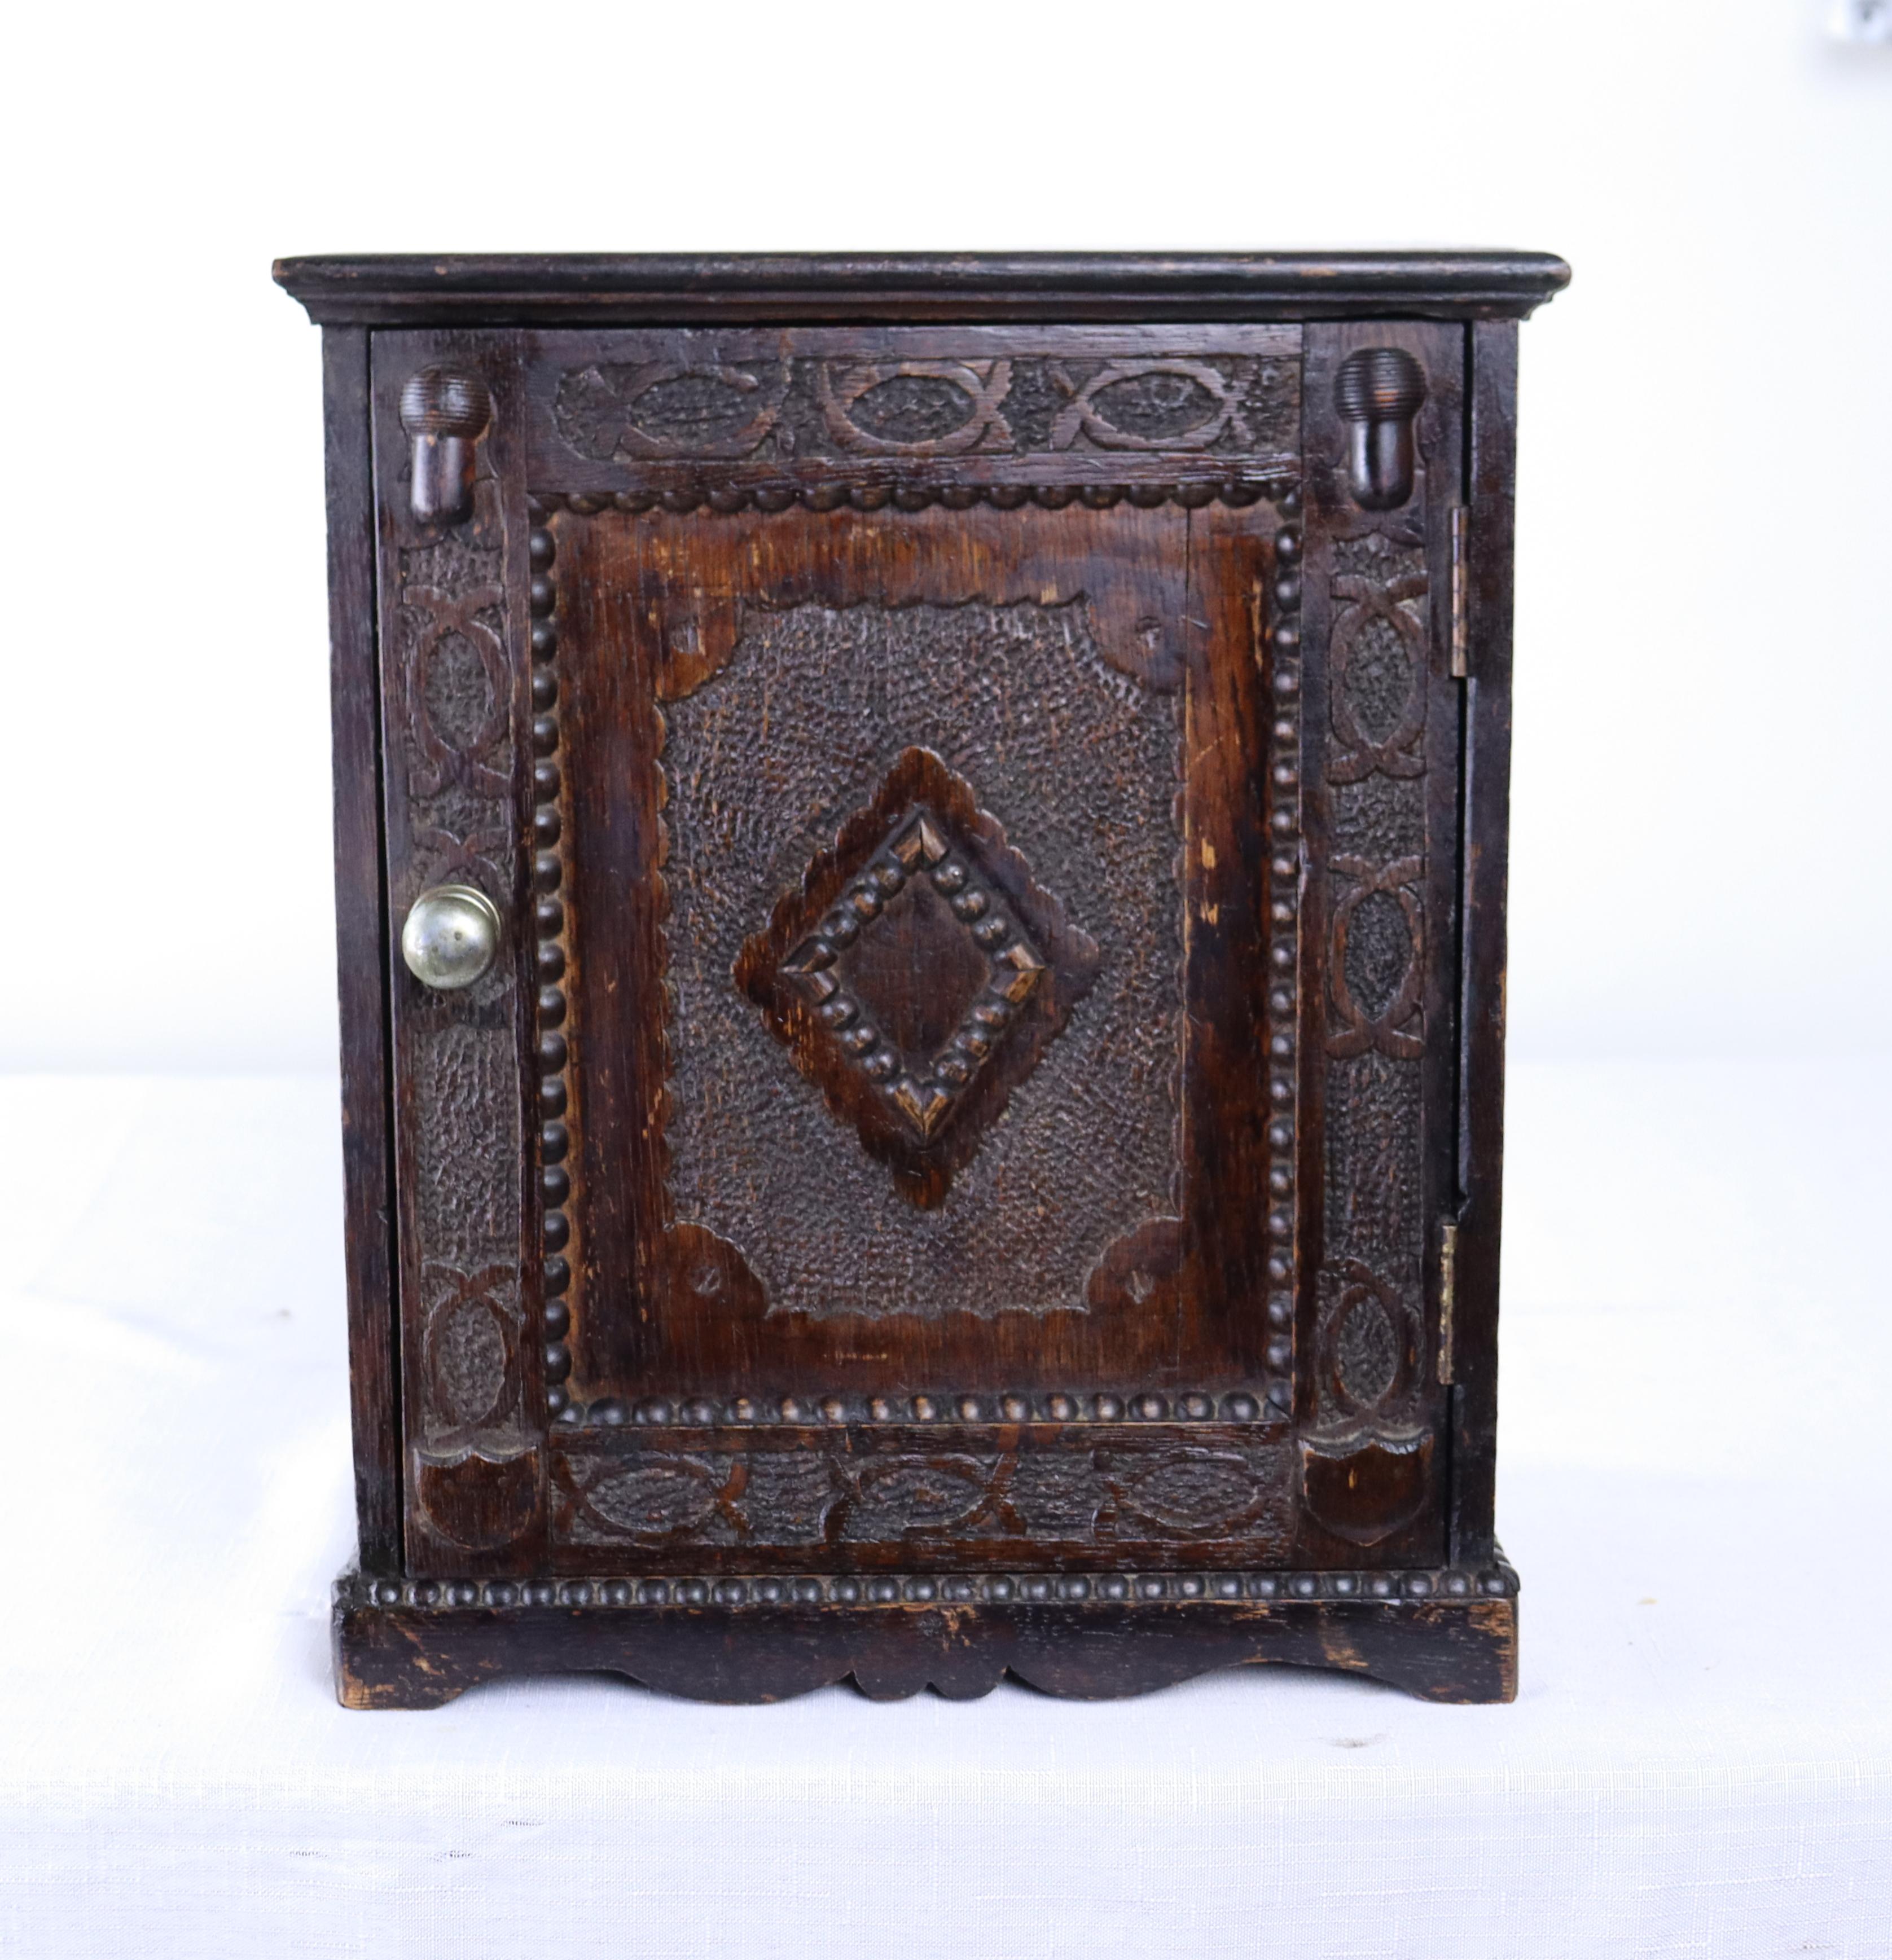 An intricately carved antique Welsh medicine cabinet with a small charming drawer on the inside. Can easily be wall mounted or used as is.